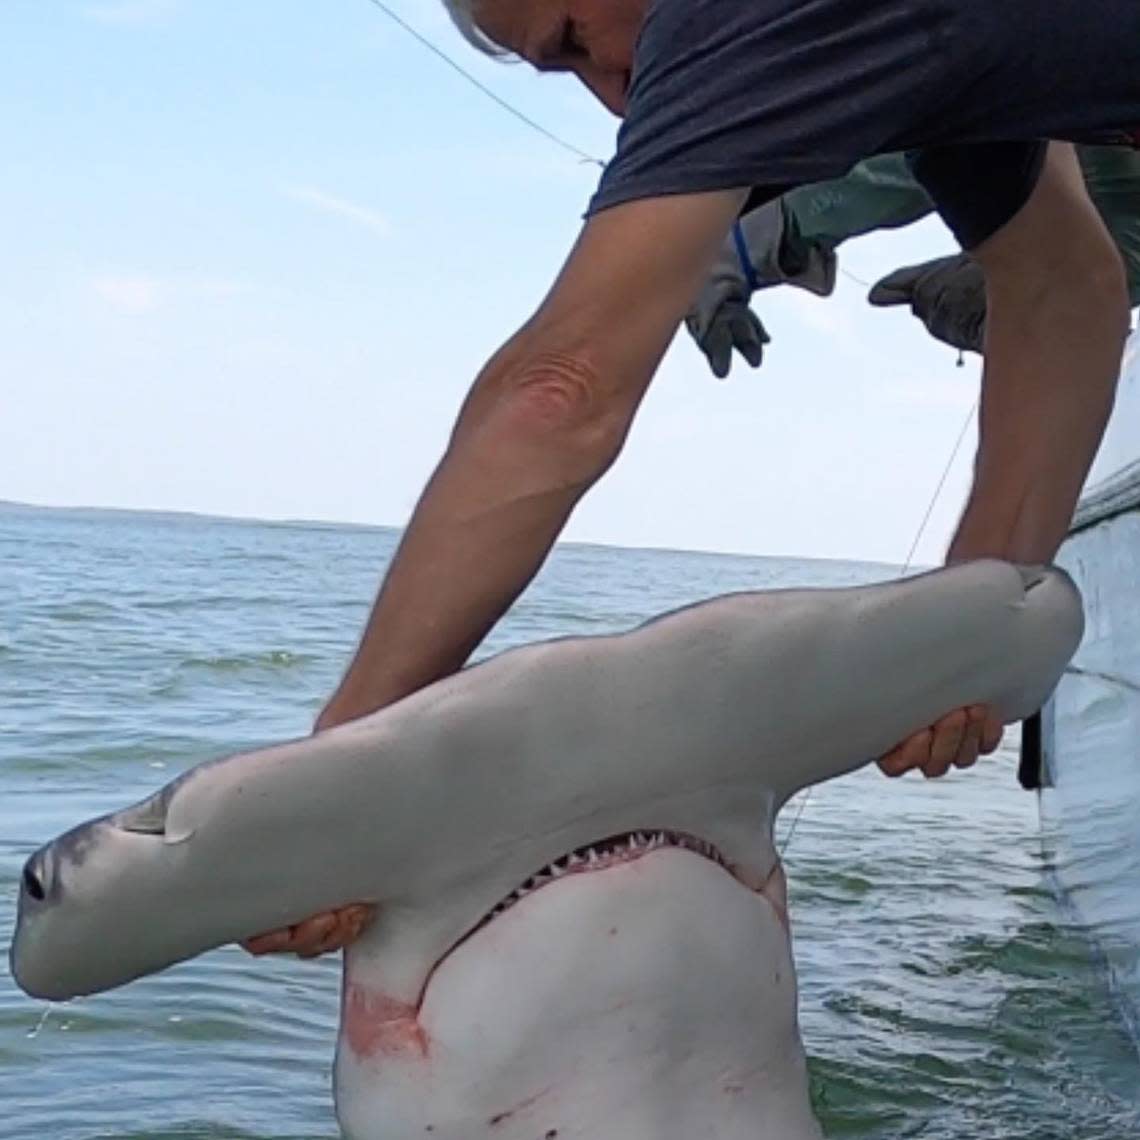 A hammerhead shark that was caught and released in Hilton Head Island waters. Chip Michalove